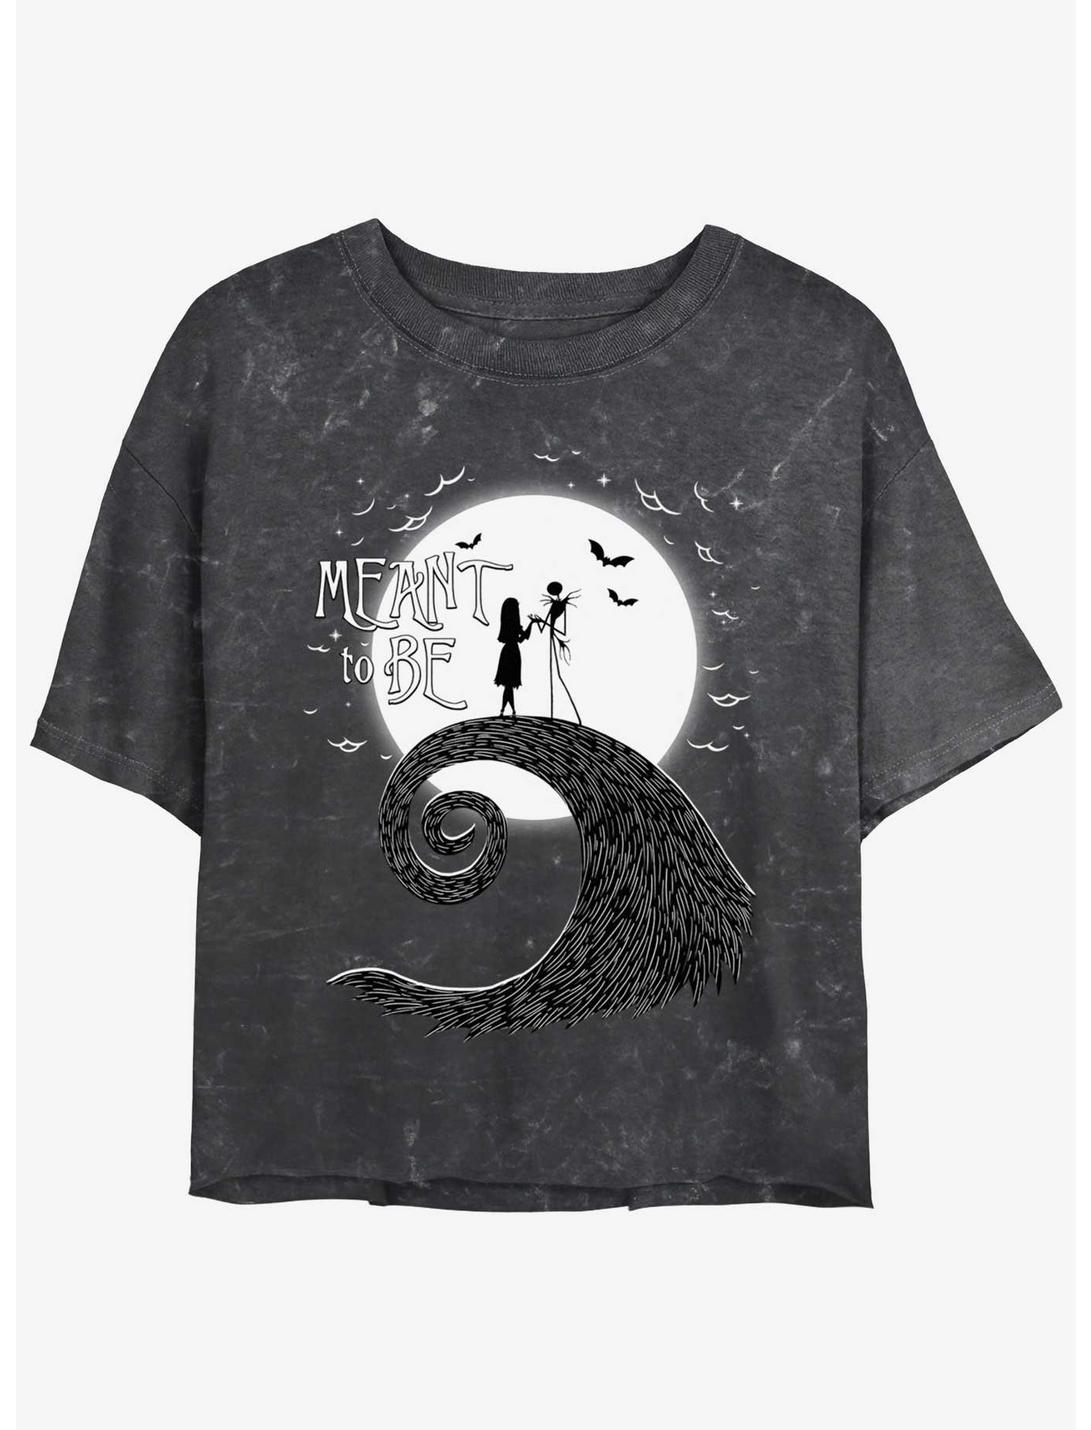 Disney The Nightmare Before Christmas Jack and Sally Meant To Be Mineral Wash Girls Crop T-Shirt, BLACK, hi-res